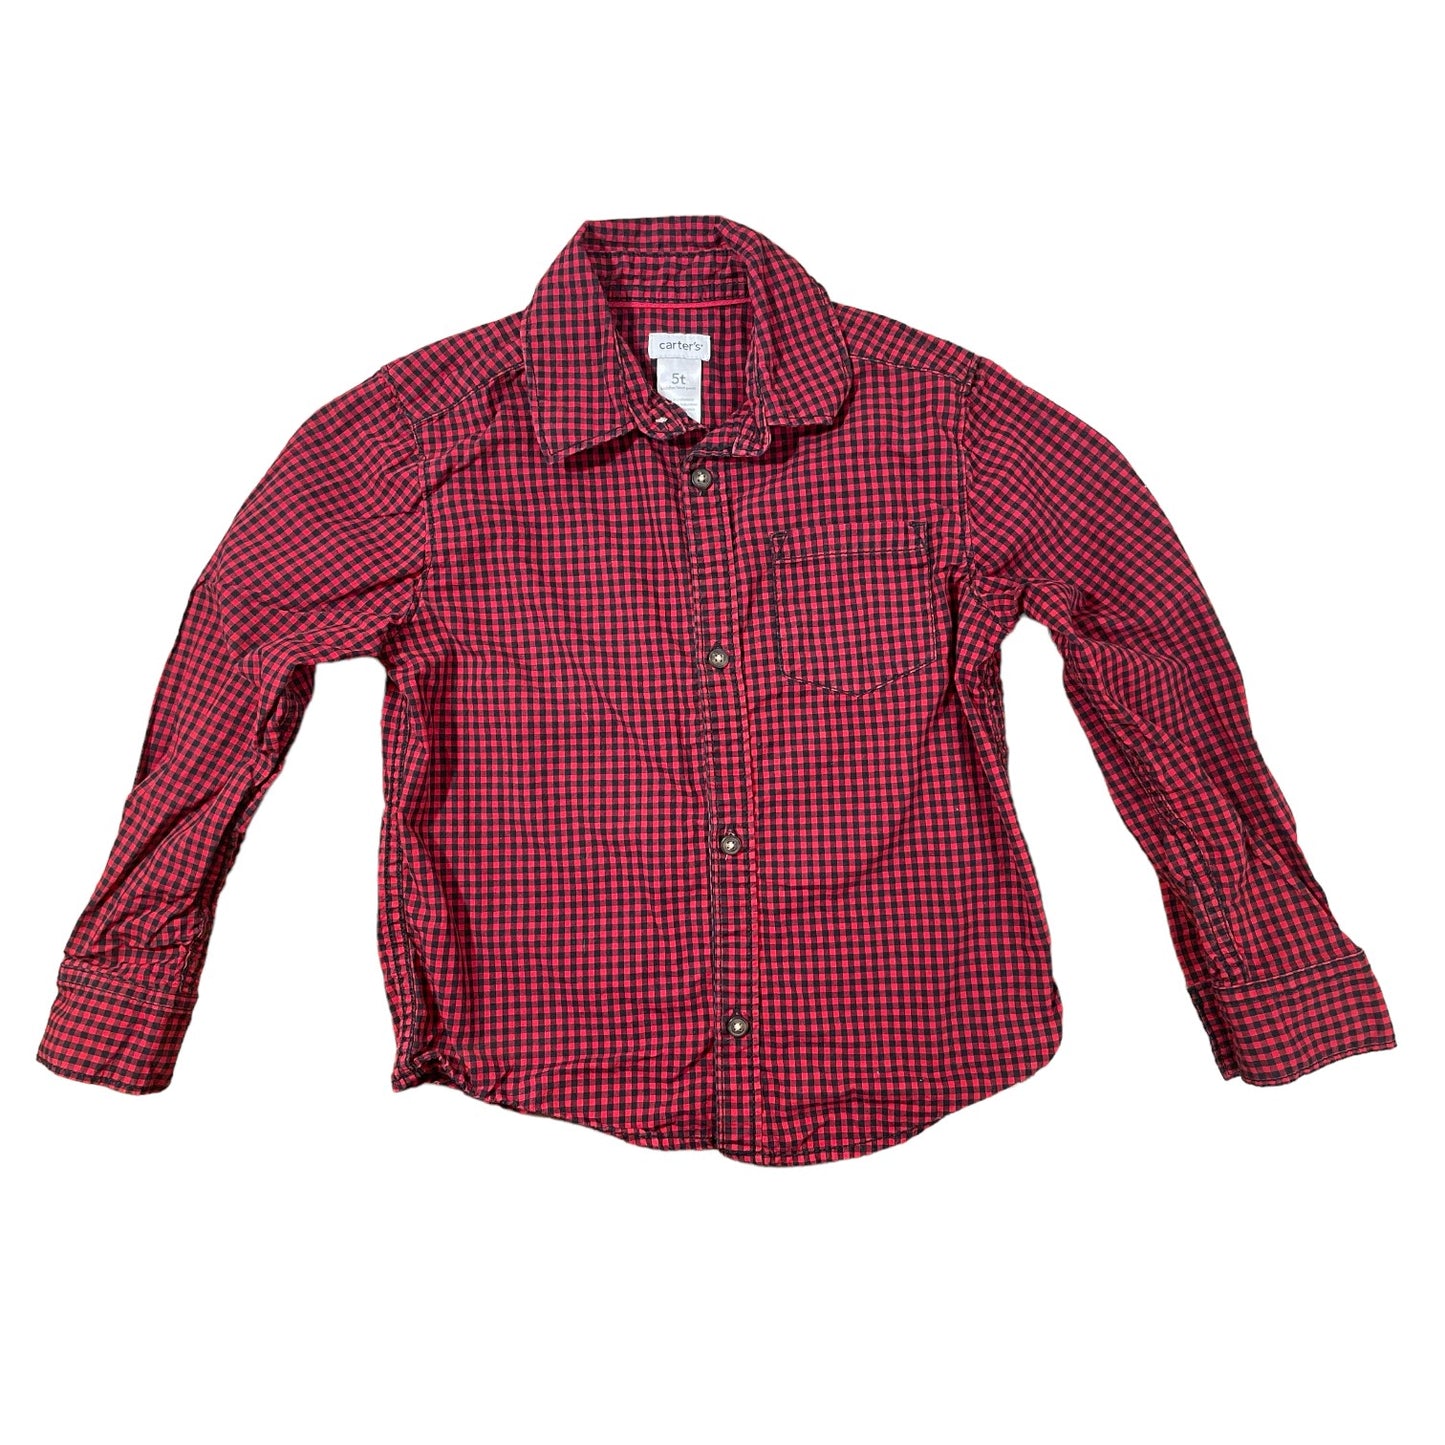 Carter's 5T Boys dress shirt red and black checkered